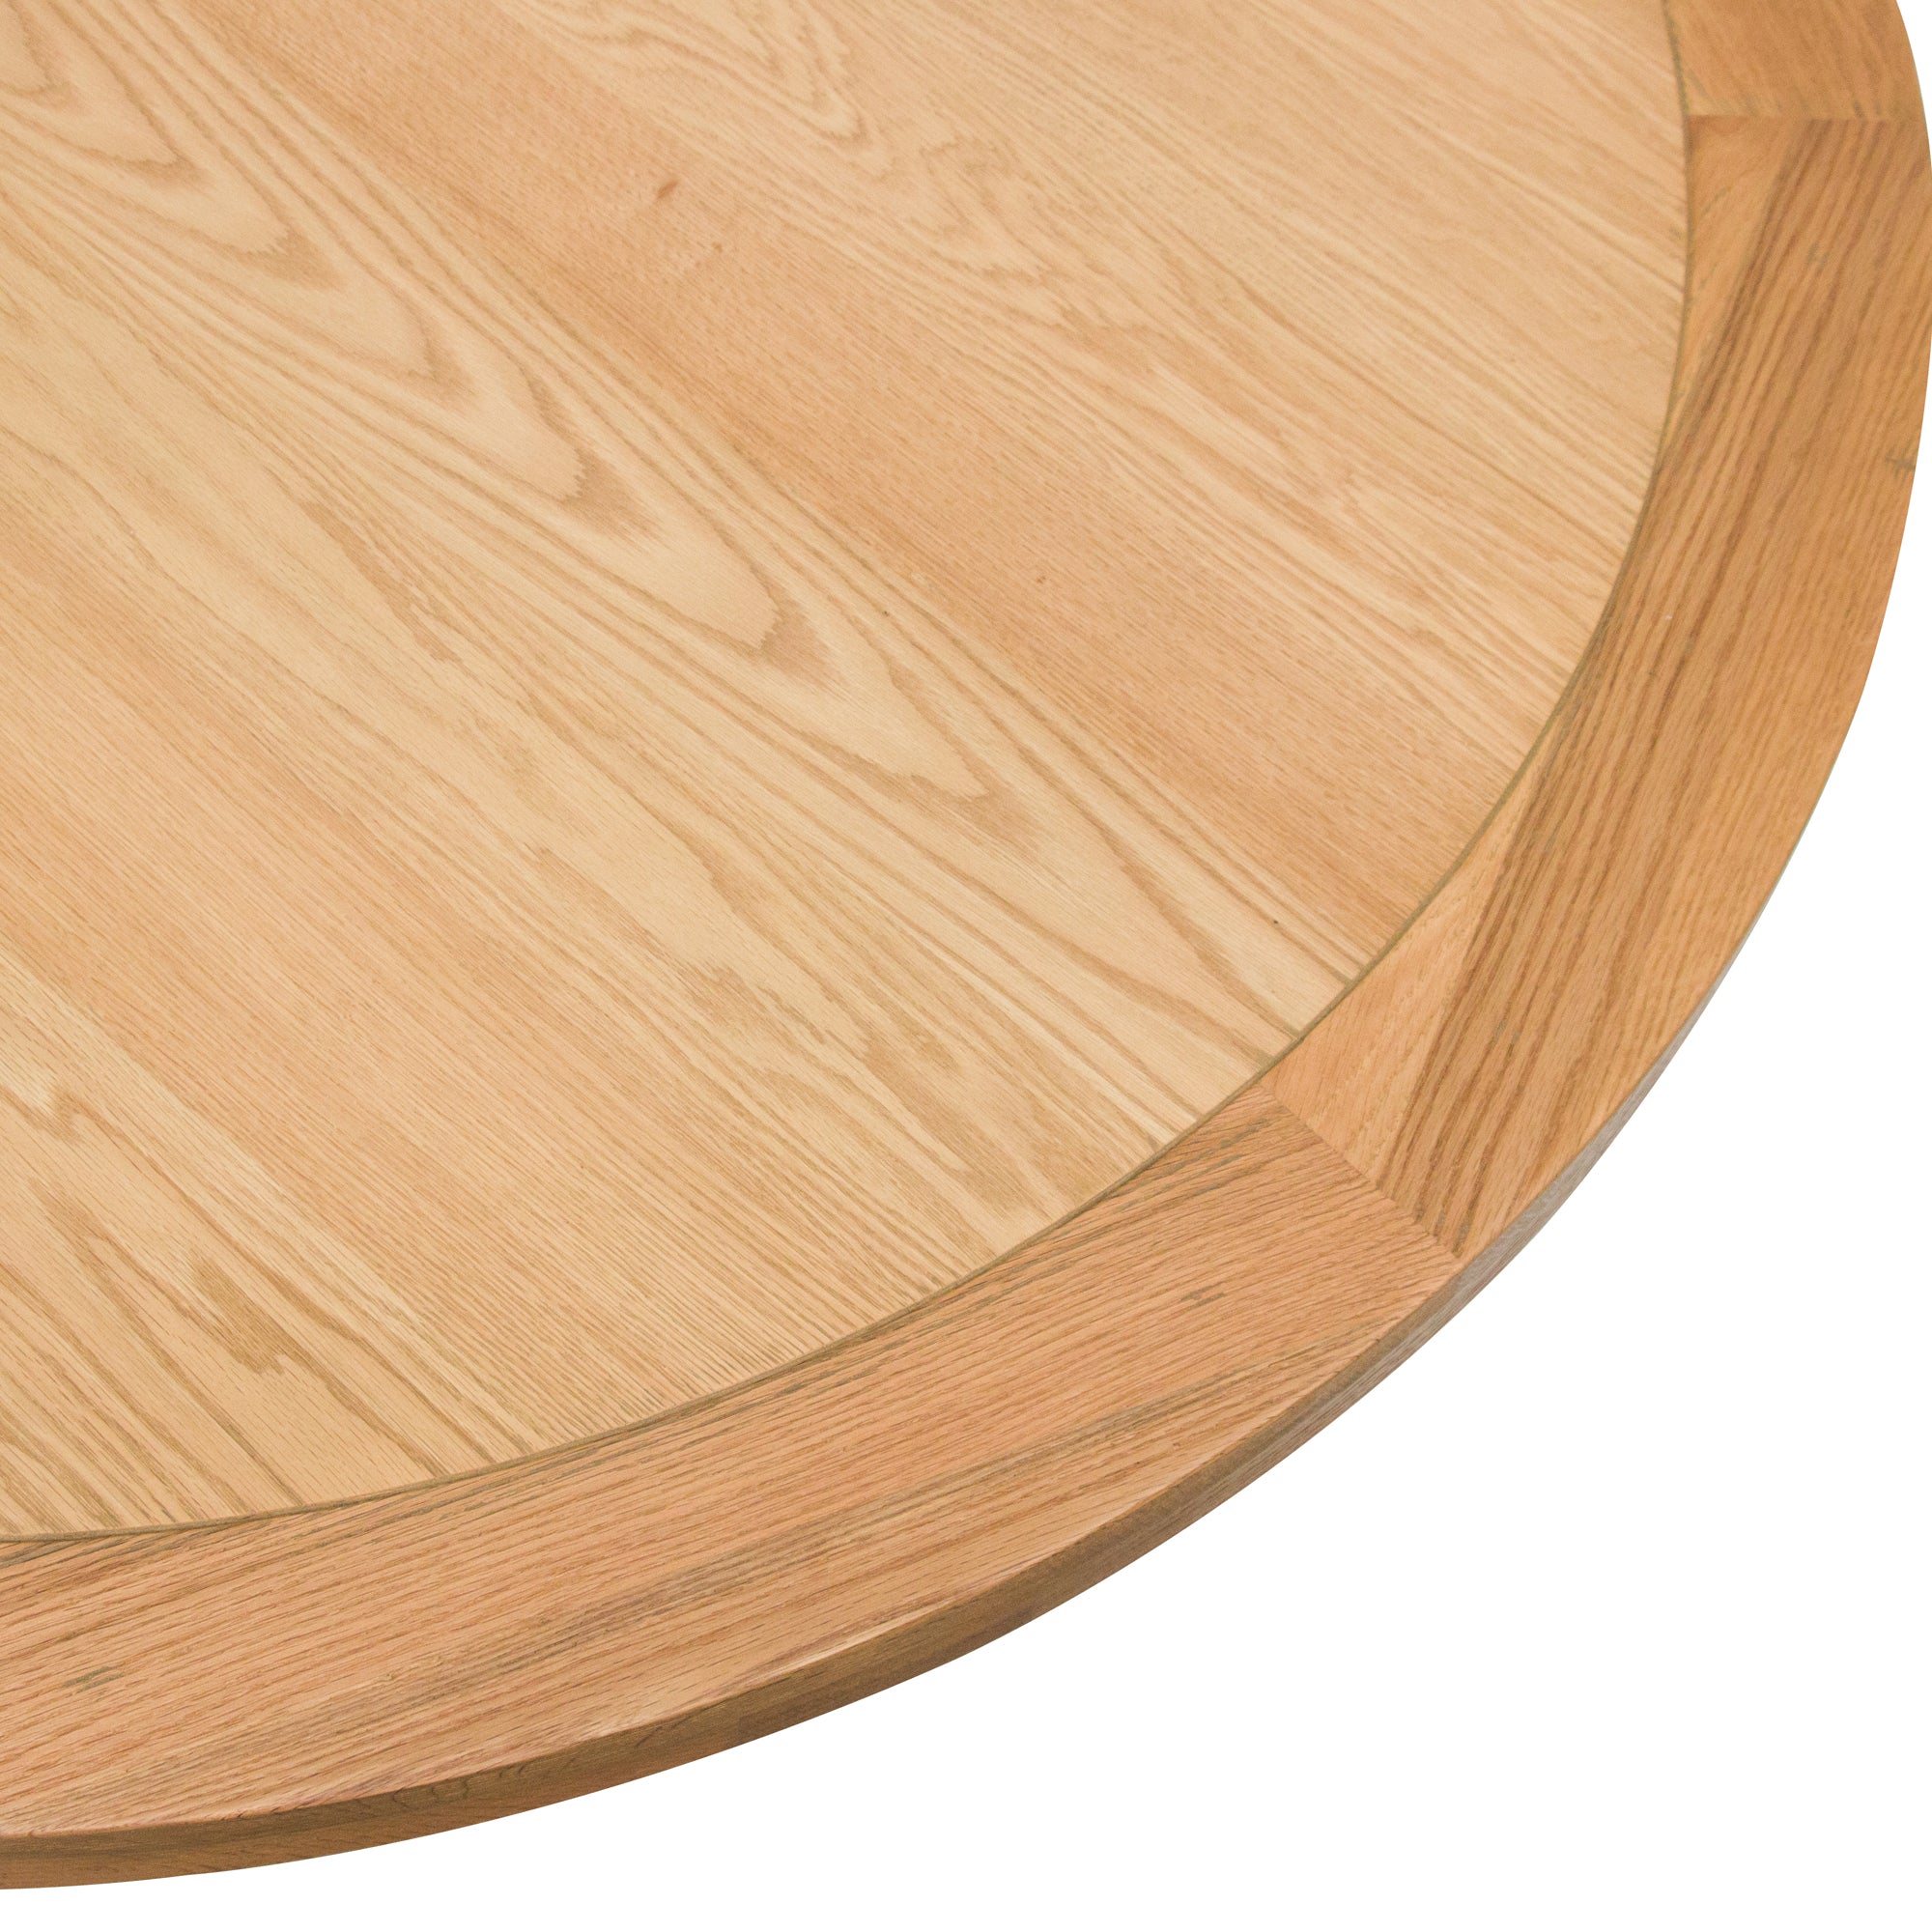 Simon 1.5m Round Wooden Dining Table - Distress Natural - Dining Tables